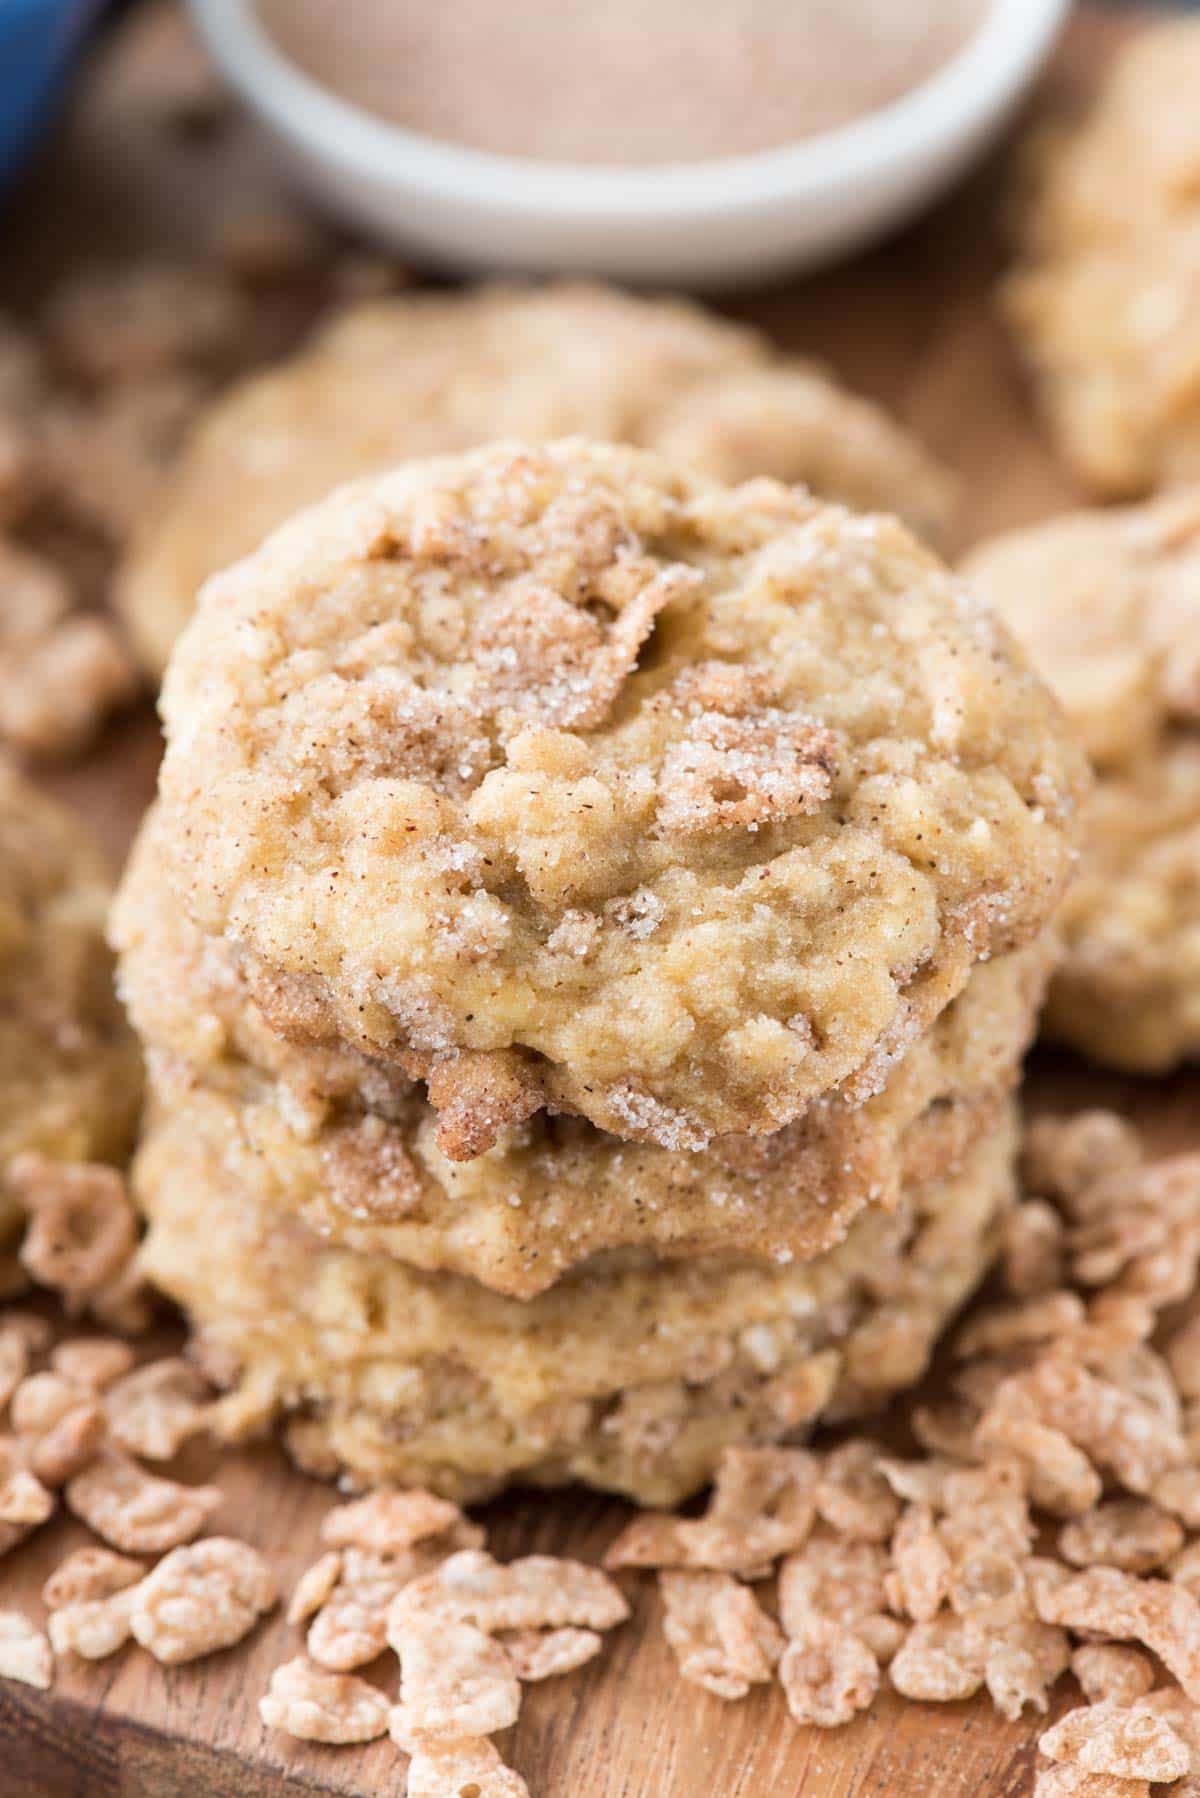 Snickerdoodle Crunch Pudding Cookies - this EASY pudding cookie recipe is a soft cookie full of crunchy cinnamon cereal and coated in cinnamon sugar! The perfect snickerdoodle recipe with a crunchy twist.